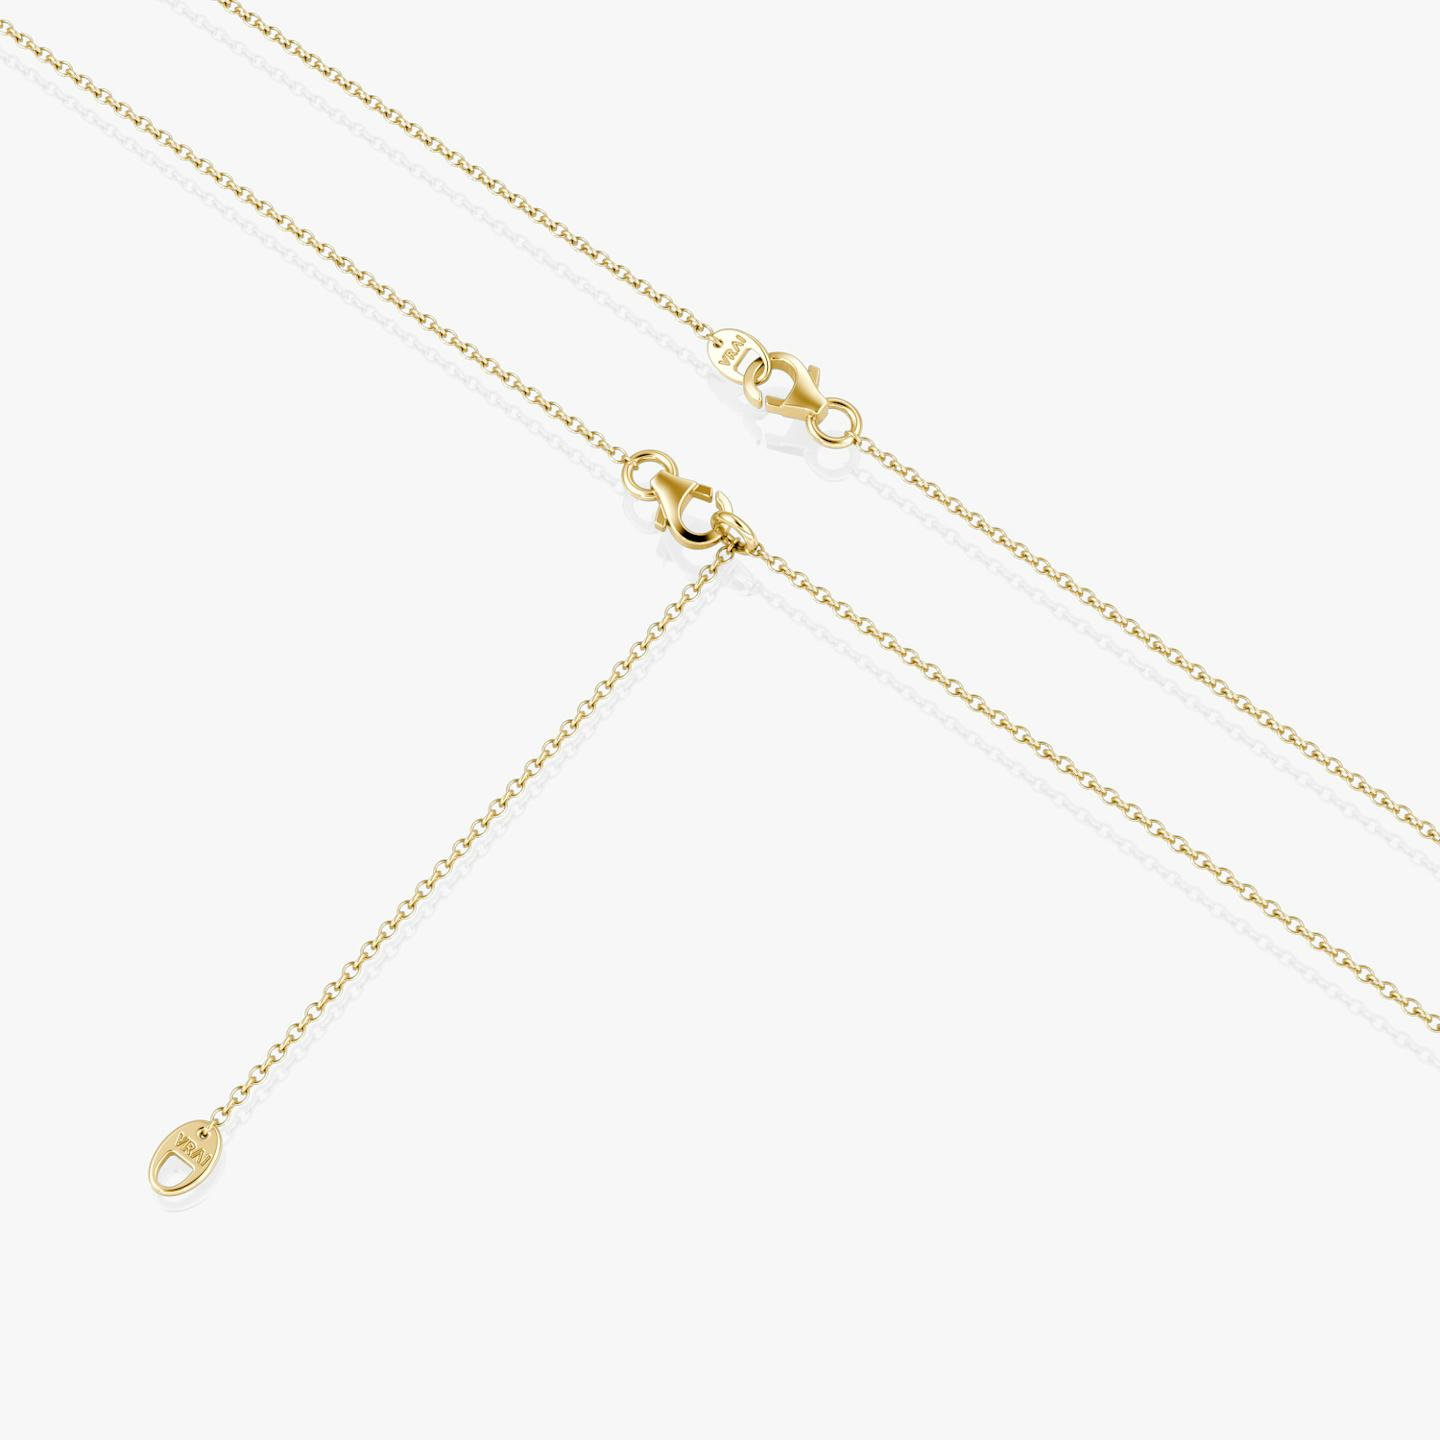 VRAI V Duo Lariat Necklace | Round Brilliant and Trillion | 14k | 18k Yellow Gold | Chain length: 16-18